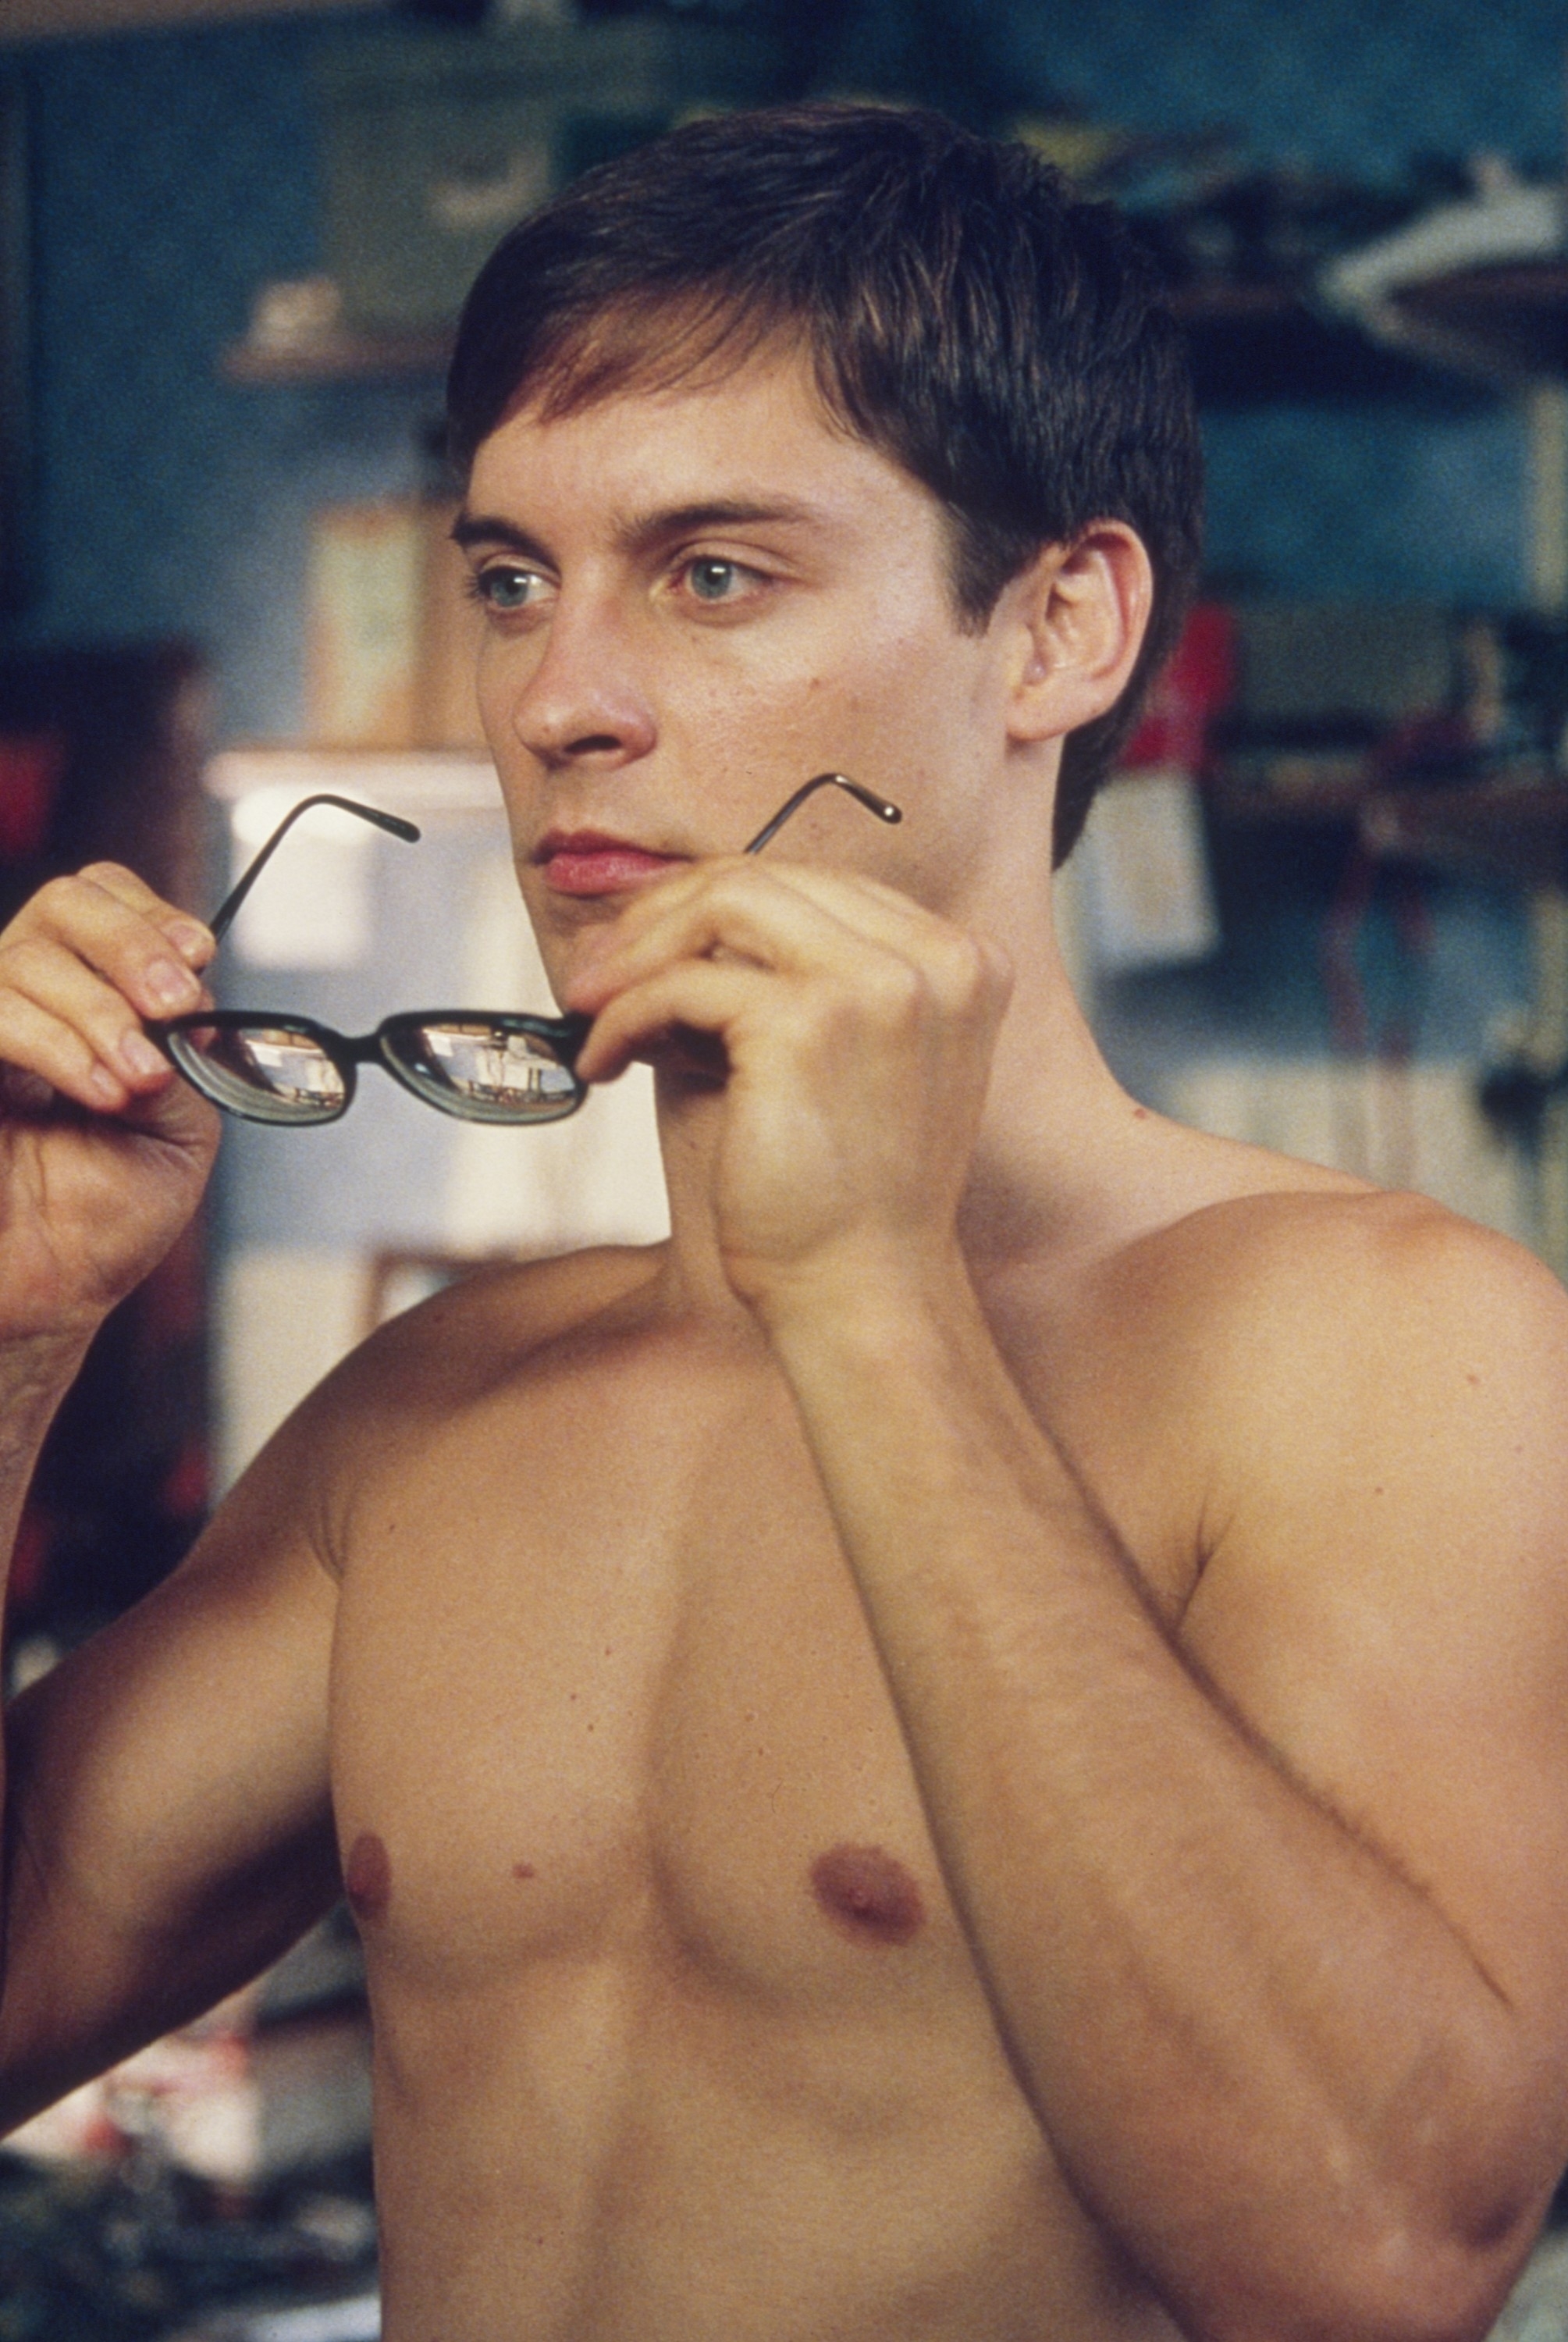 Tobey as Peter Park holding glasses up to face, shirtless, in an indoor setting